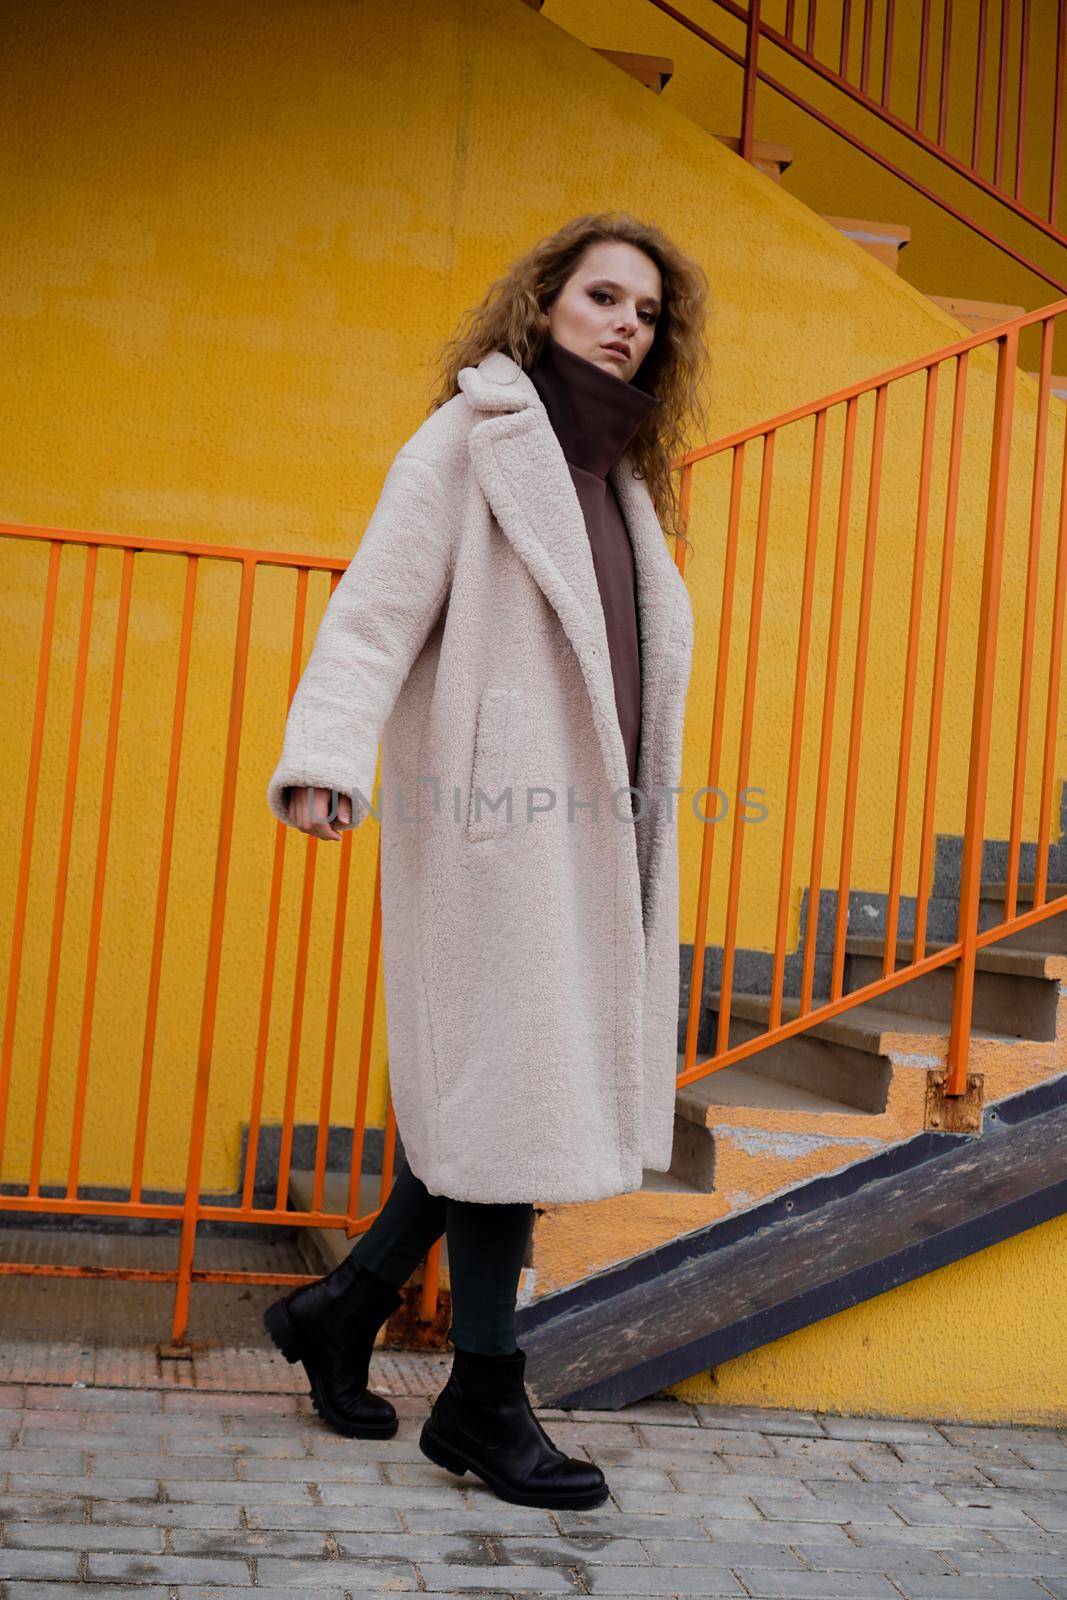 A girl with red curly hair in a white coat poses on the yellow orange parking stairs. City Style - Urban